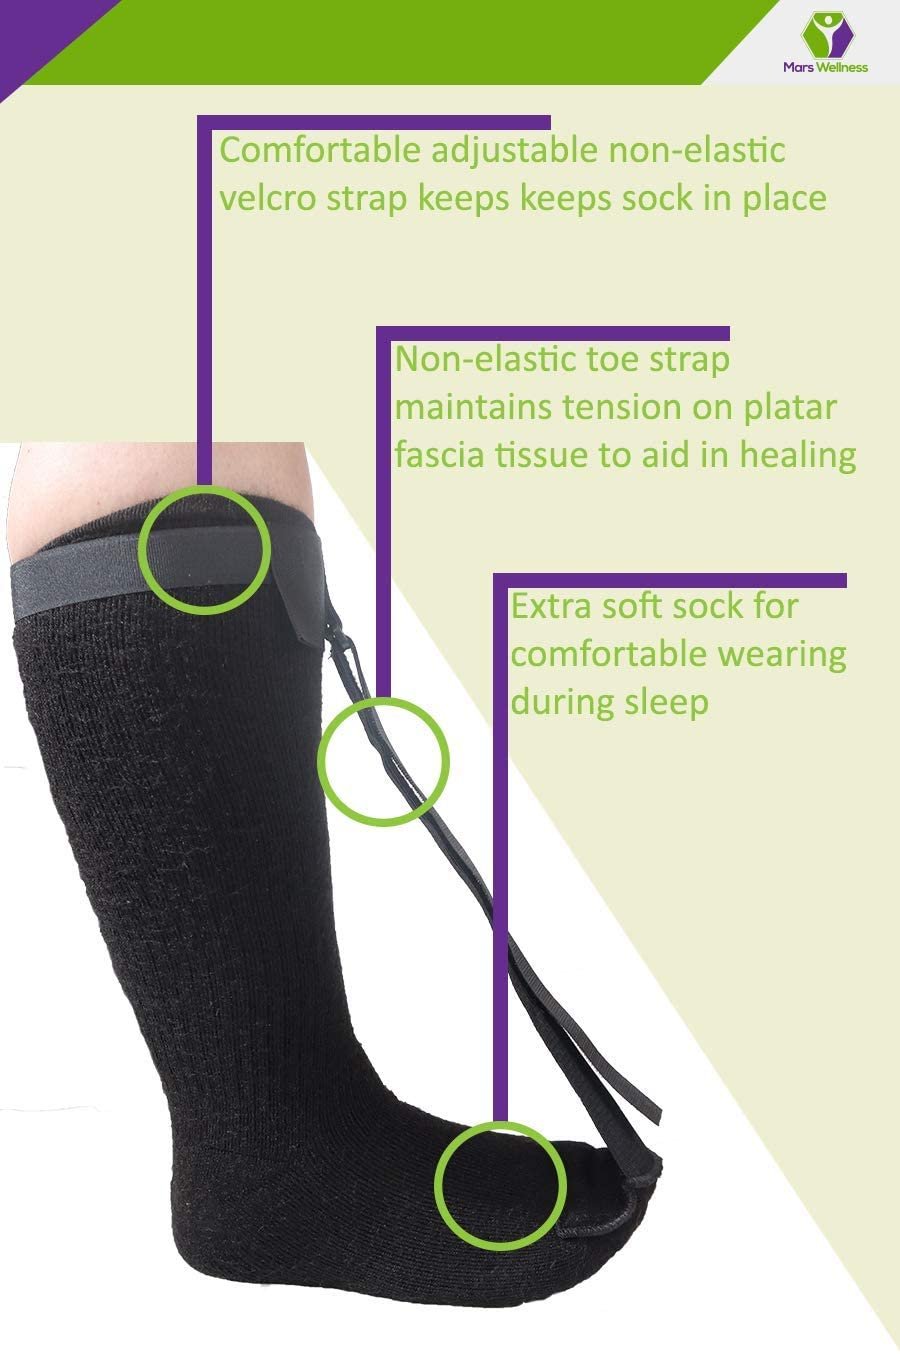 Plantar Fasciitis Stretch Night Sock - for Pain Relief from Plantar Fasciitis and Achilles Tendonitis - Black - XS - Mars Med Supply